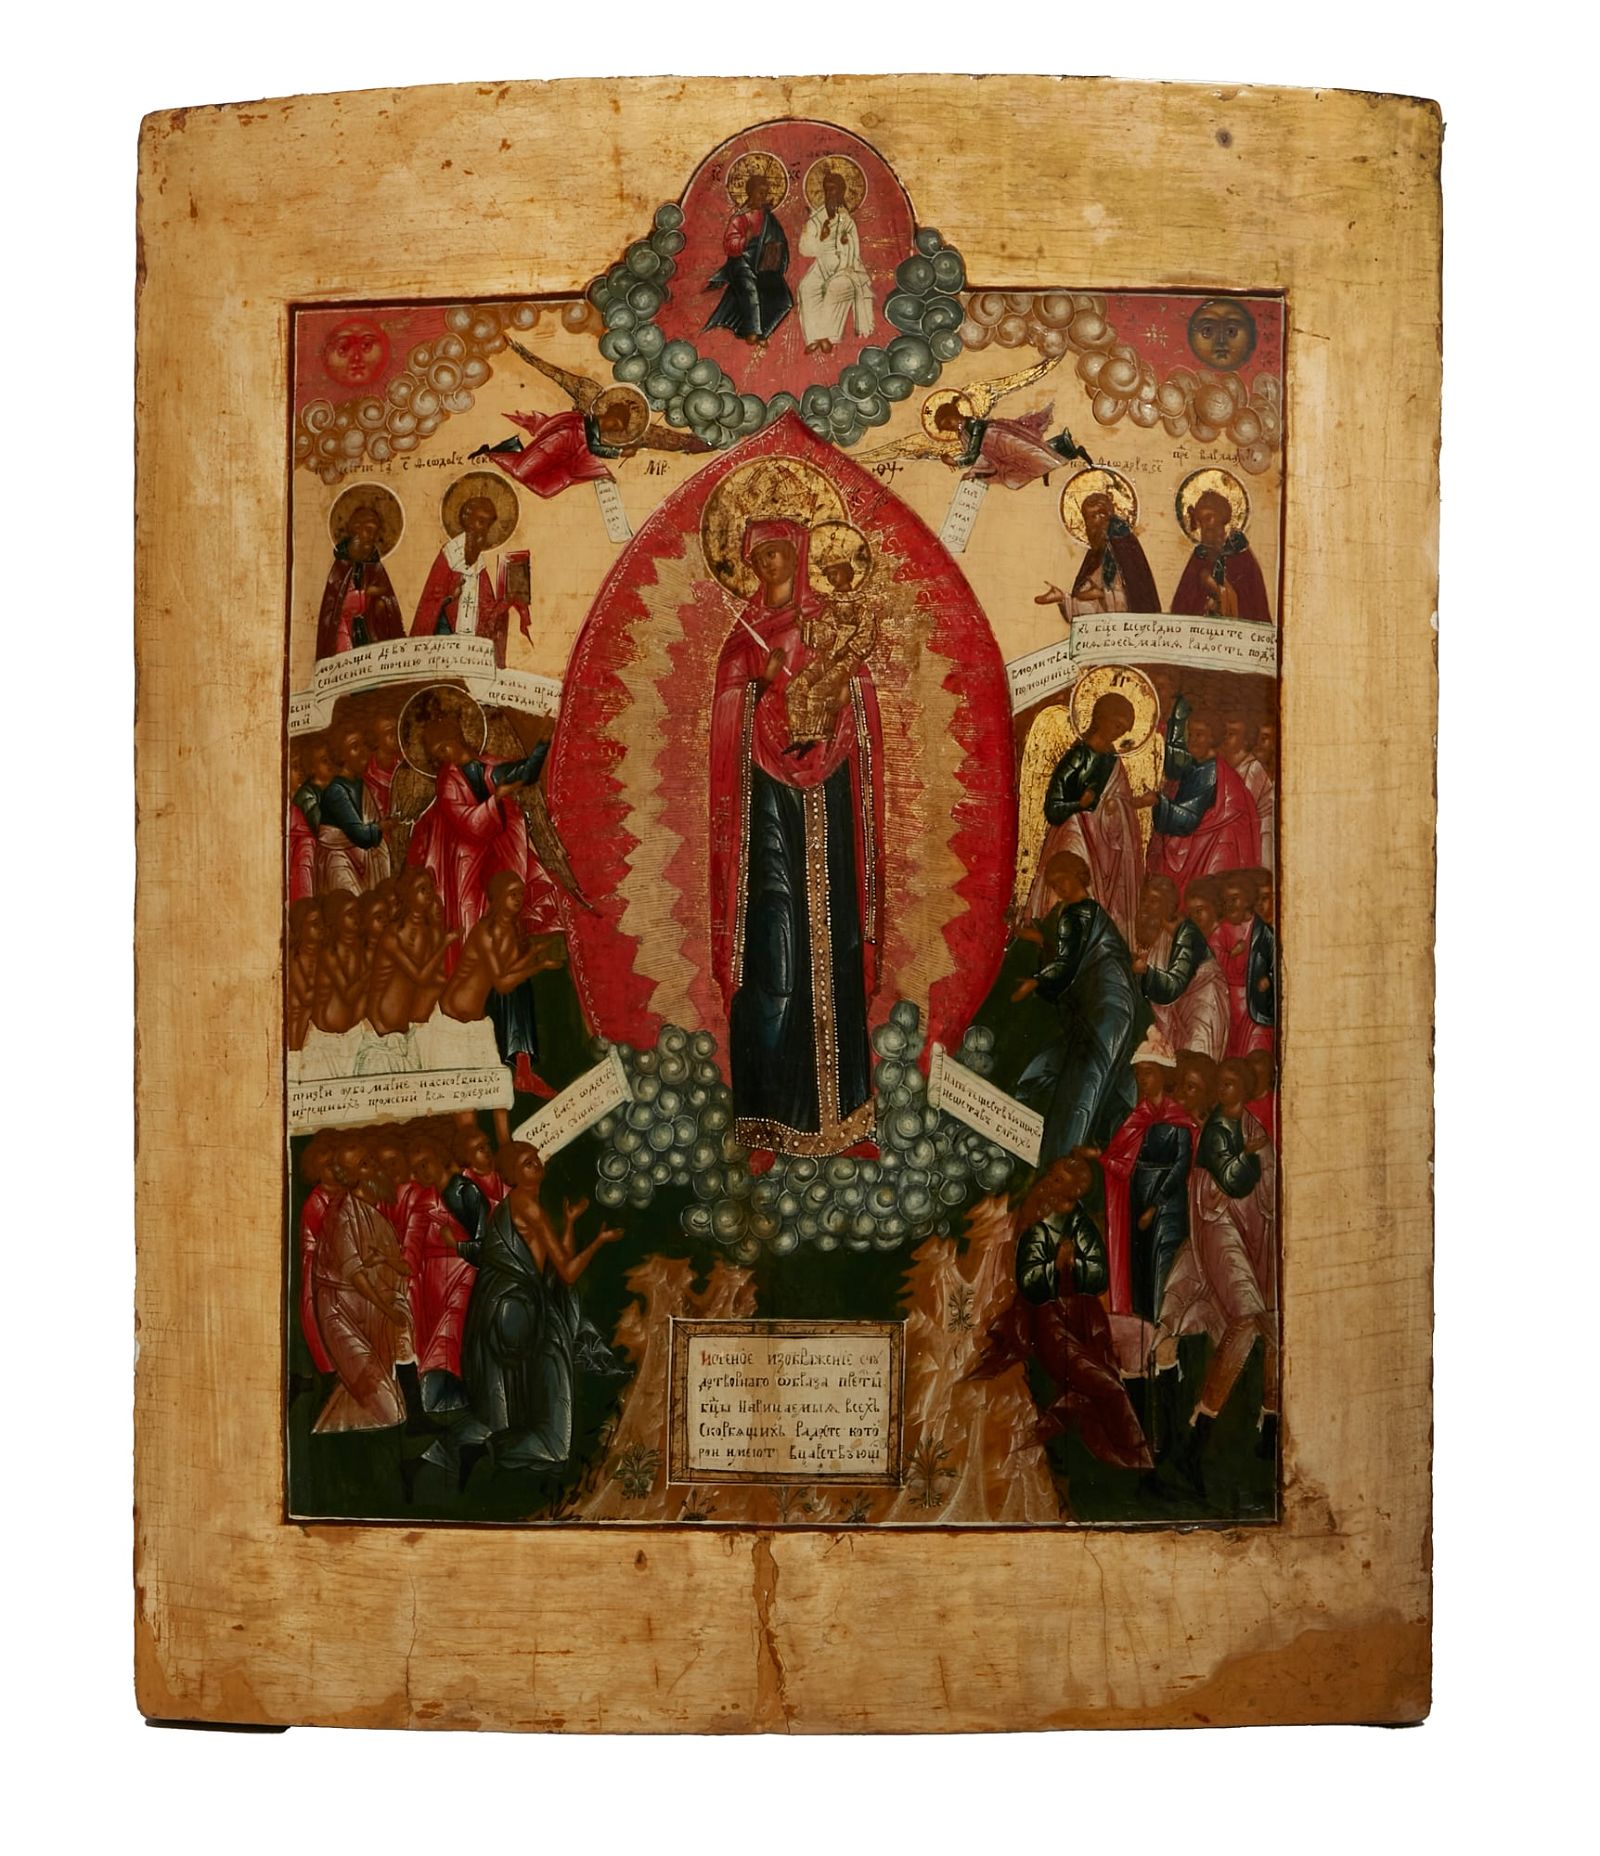 AN ICON OF THE VIRGIN OF JOY TO 2fb3f0f